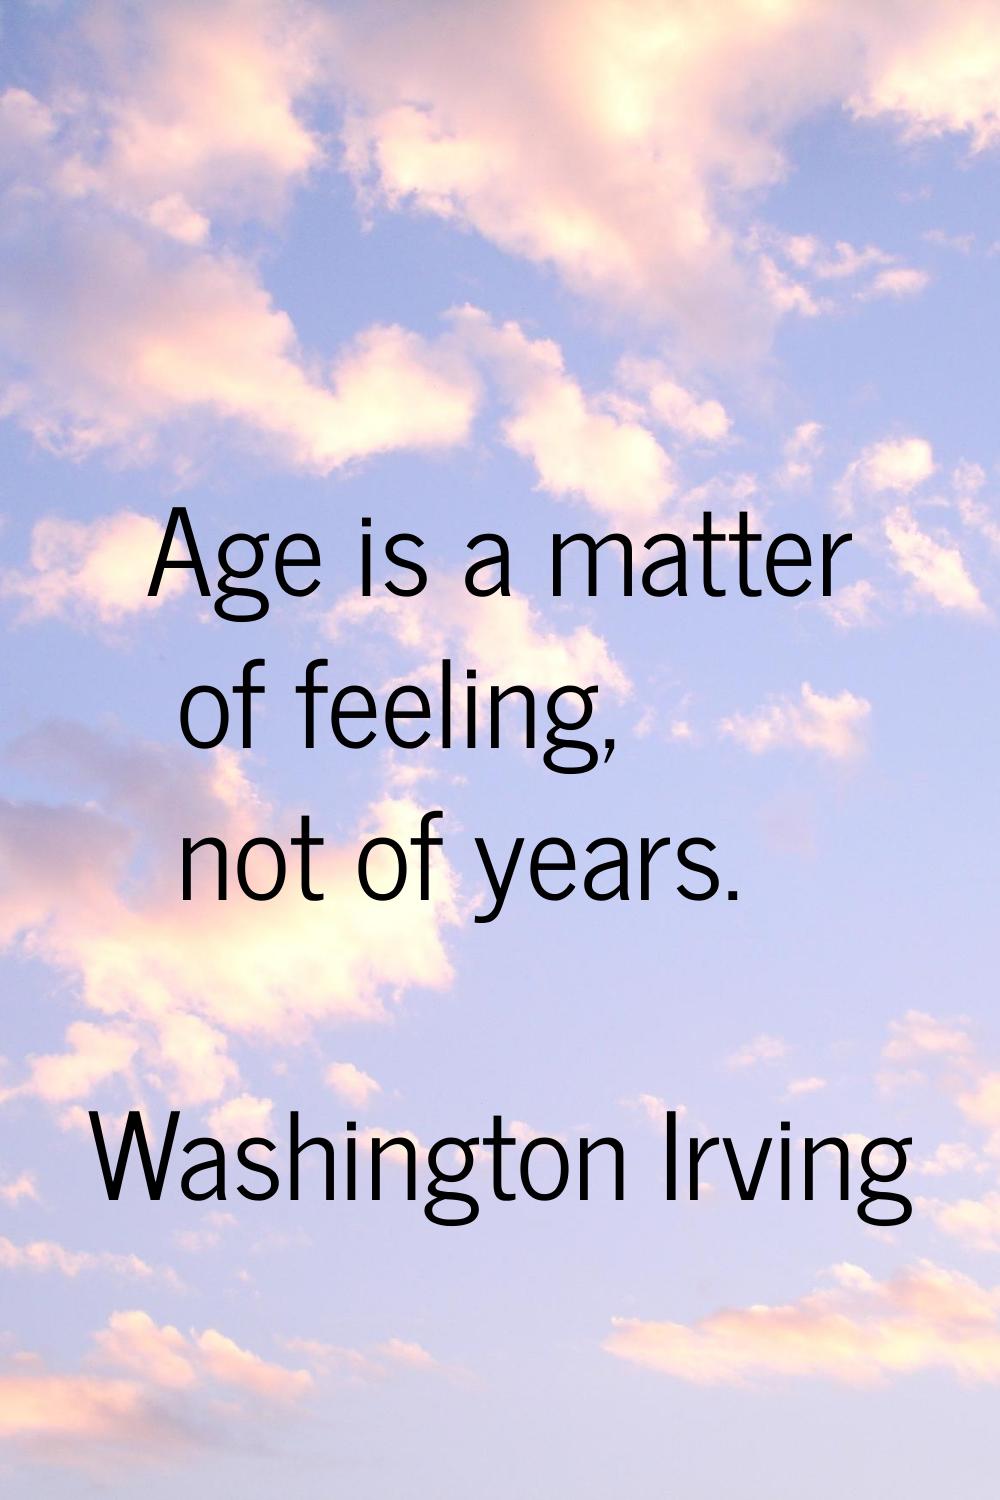 Age is a matter of feeling, not of years.